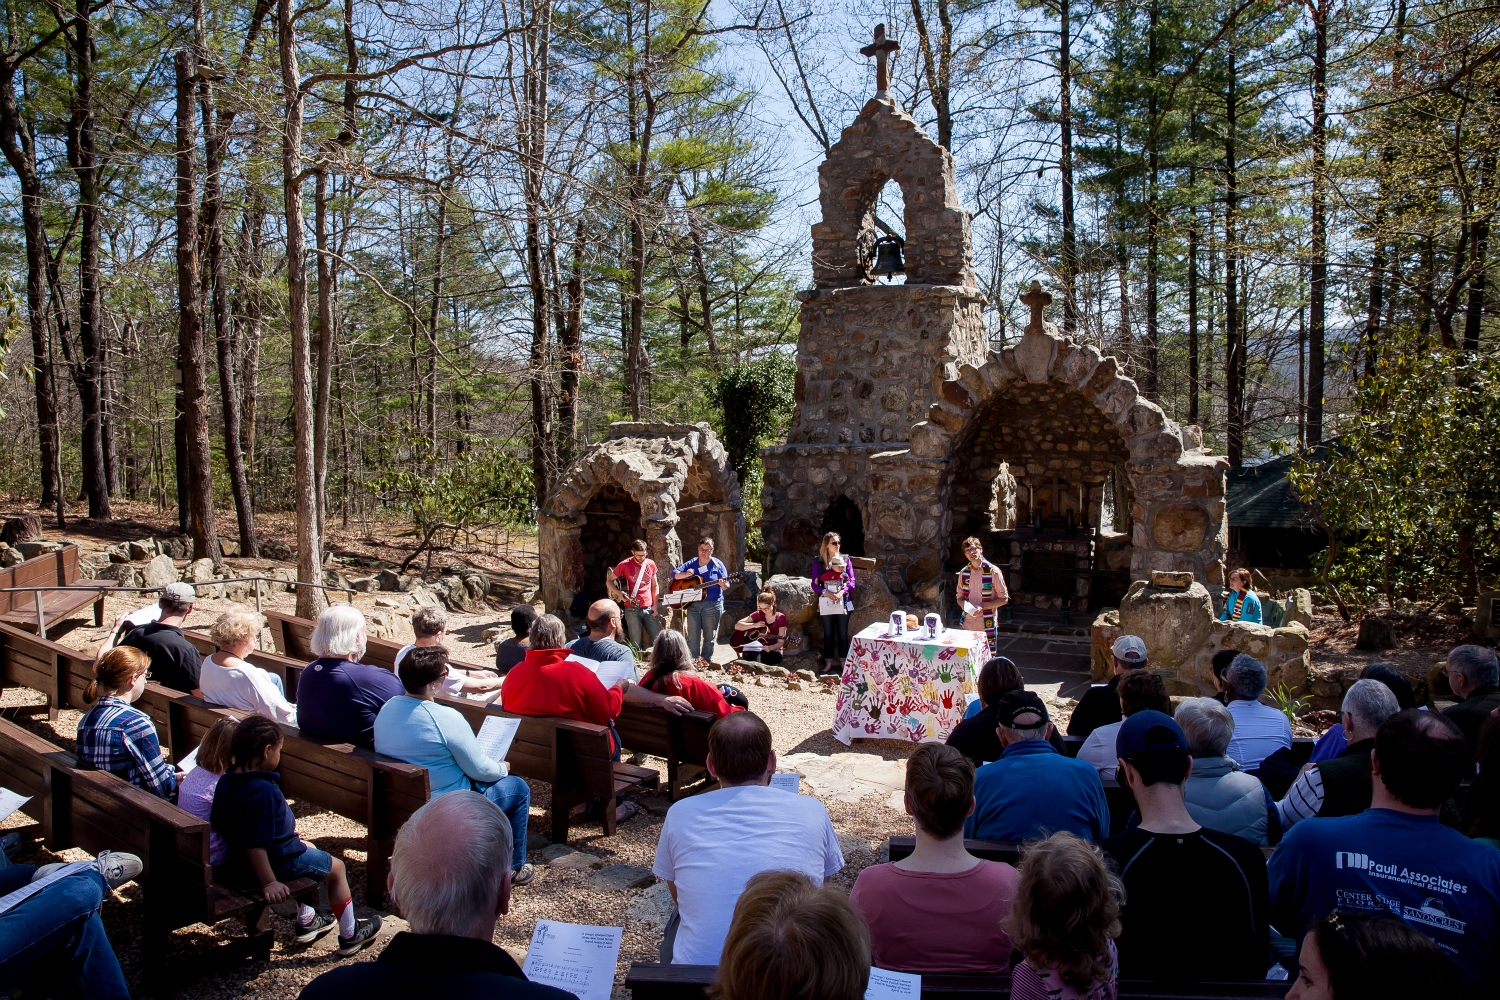 The 11 am service at the Shrine